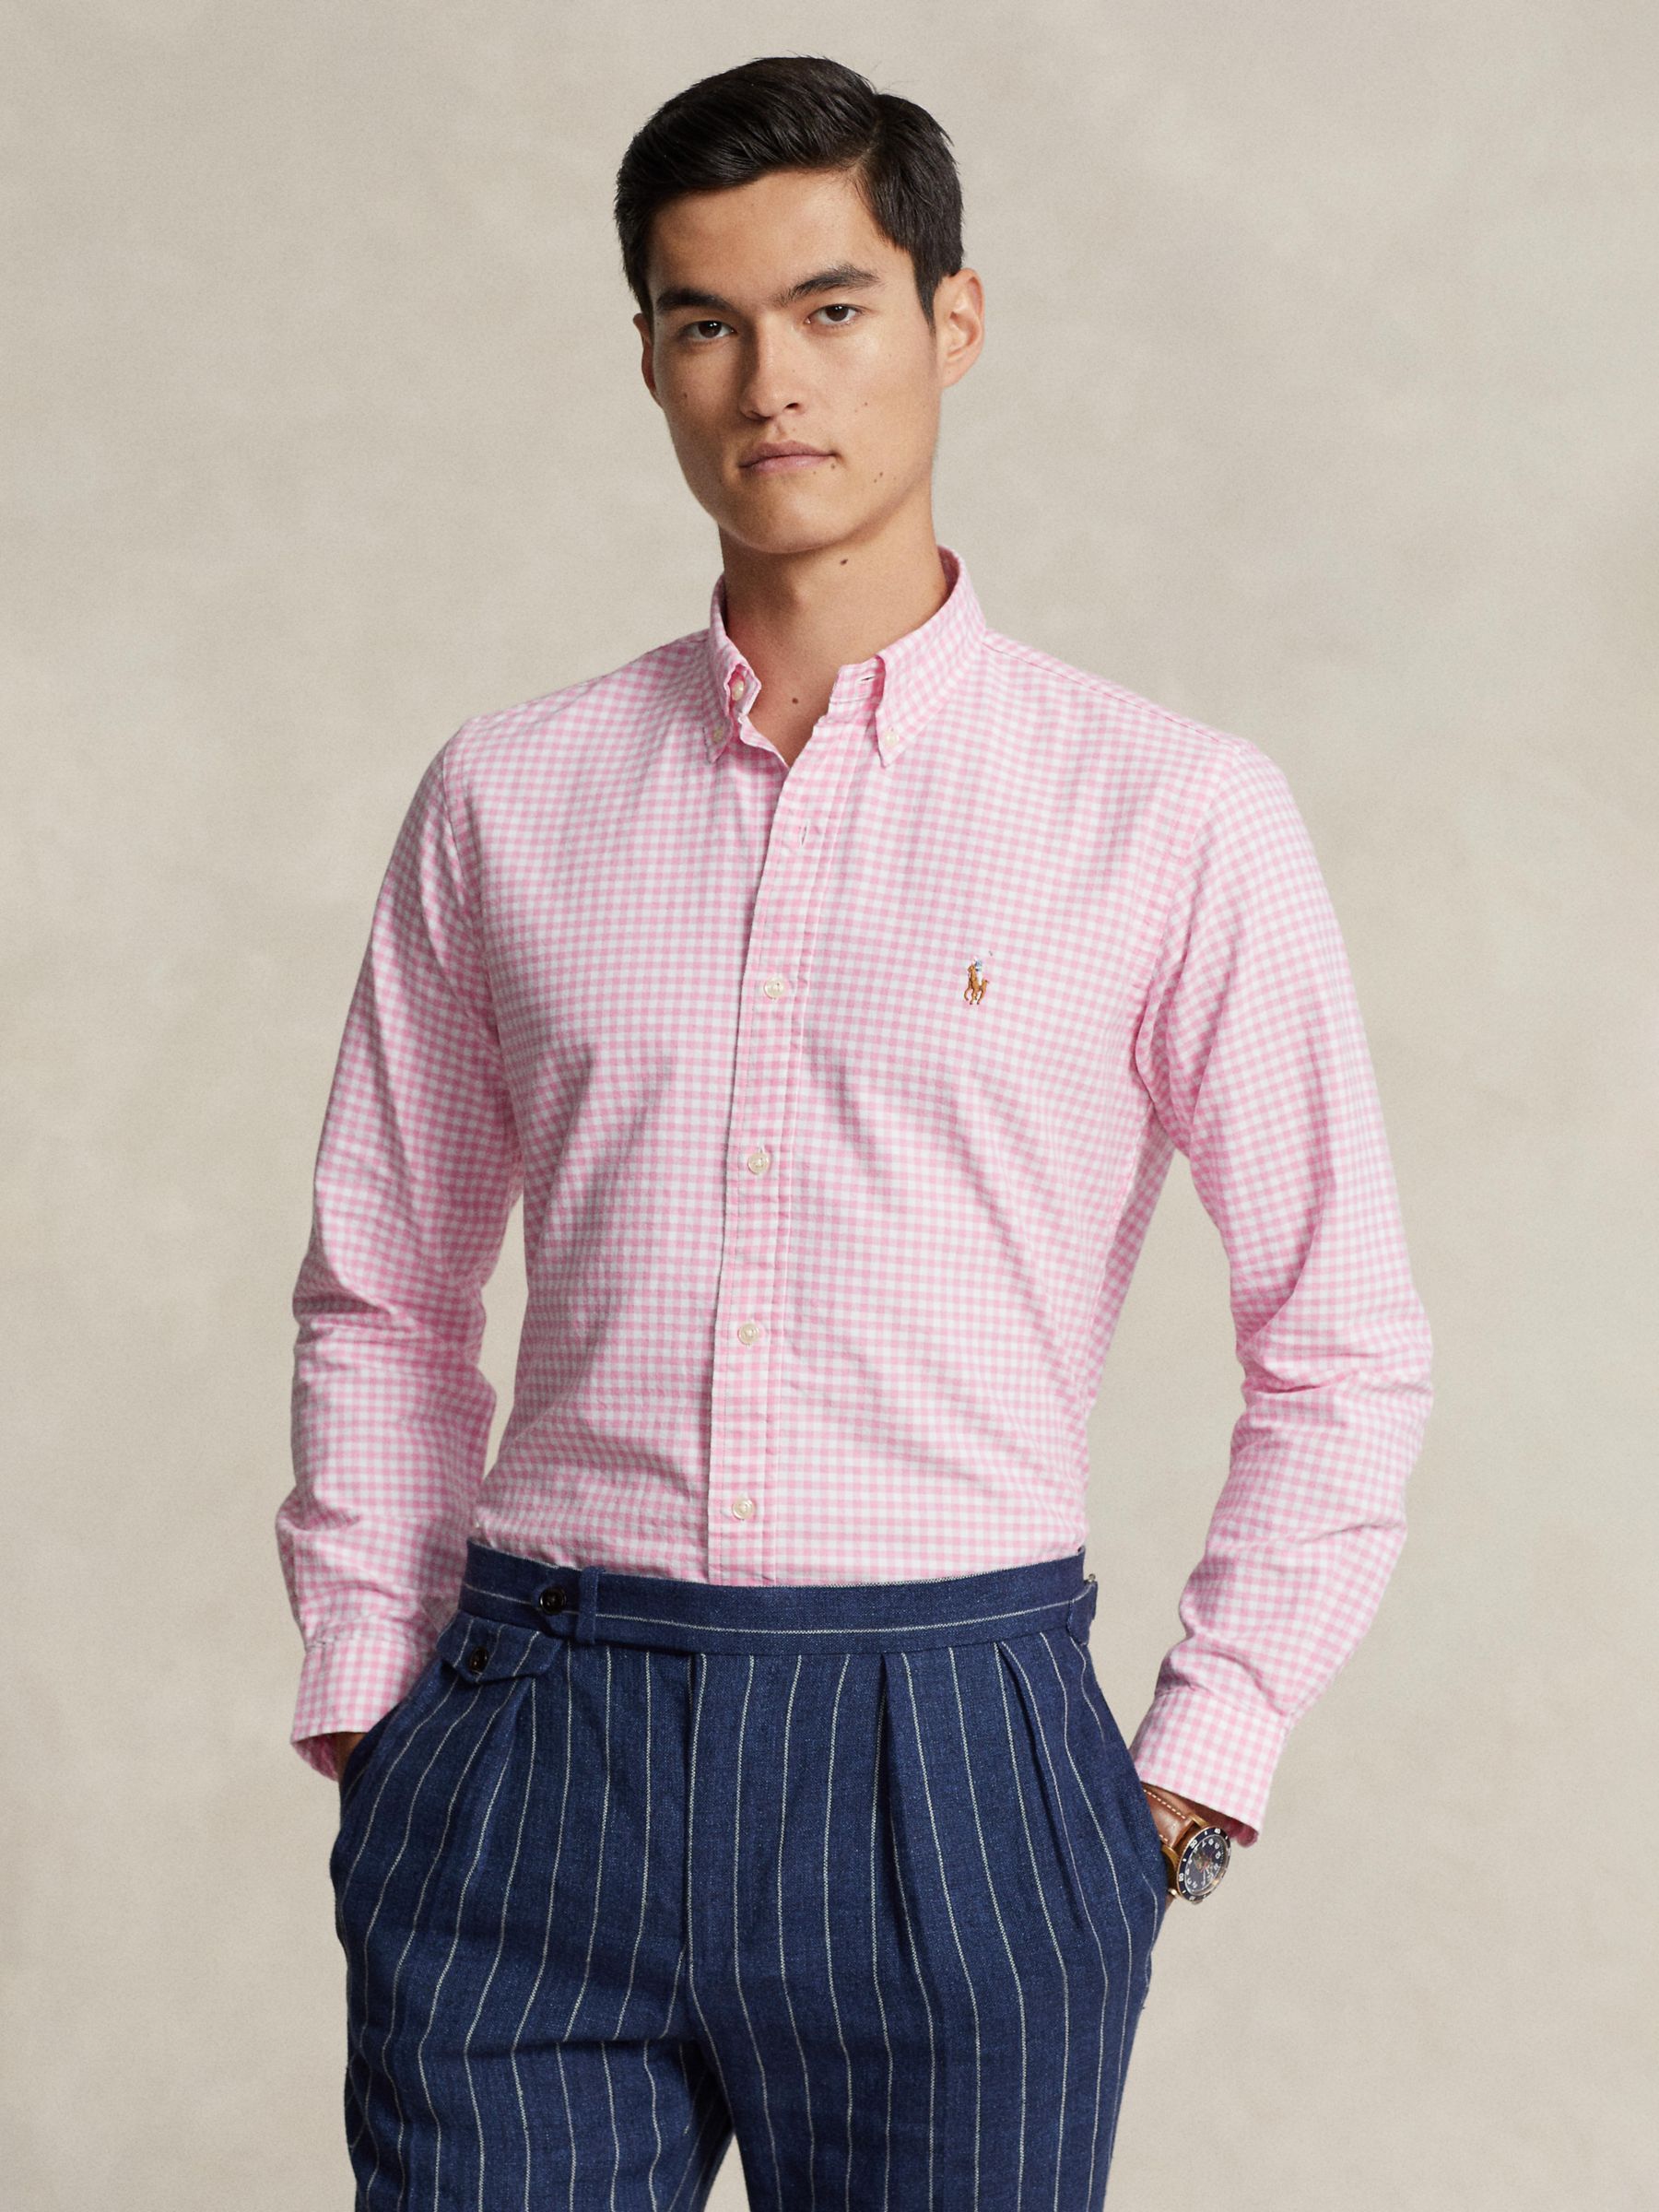 Polo Ralph Lauren Tailored Fit Gingham Oxford Shirt, Pink/White at John ...